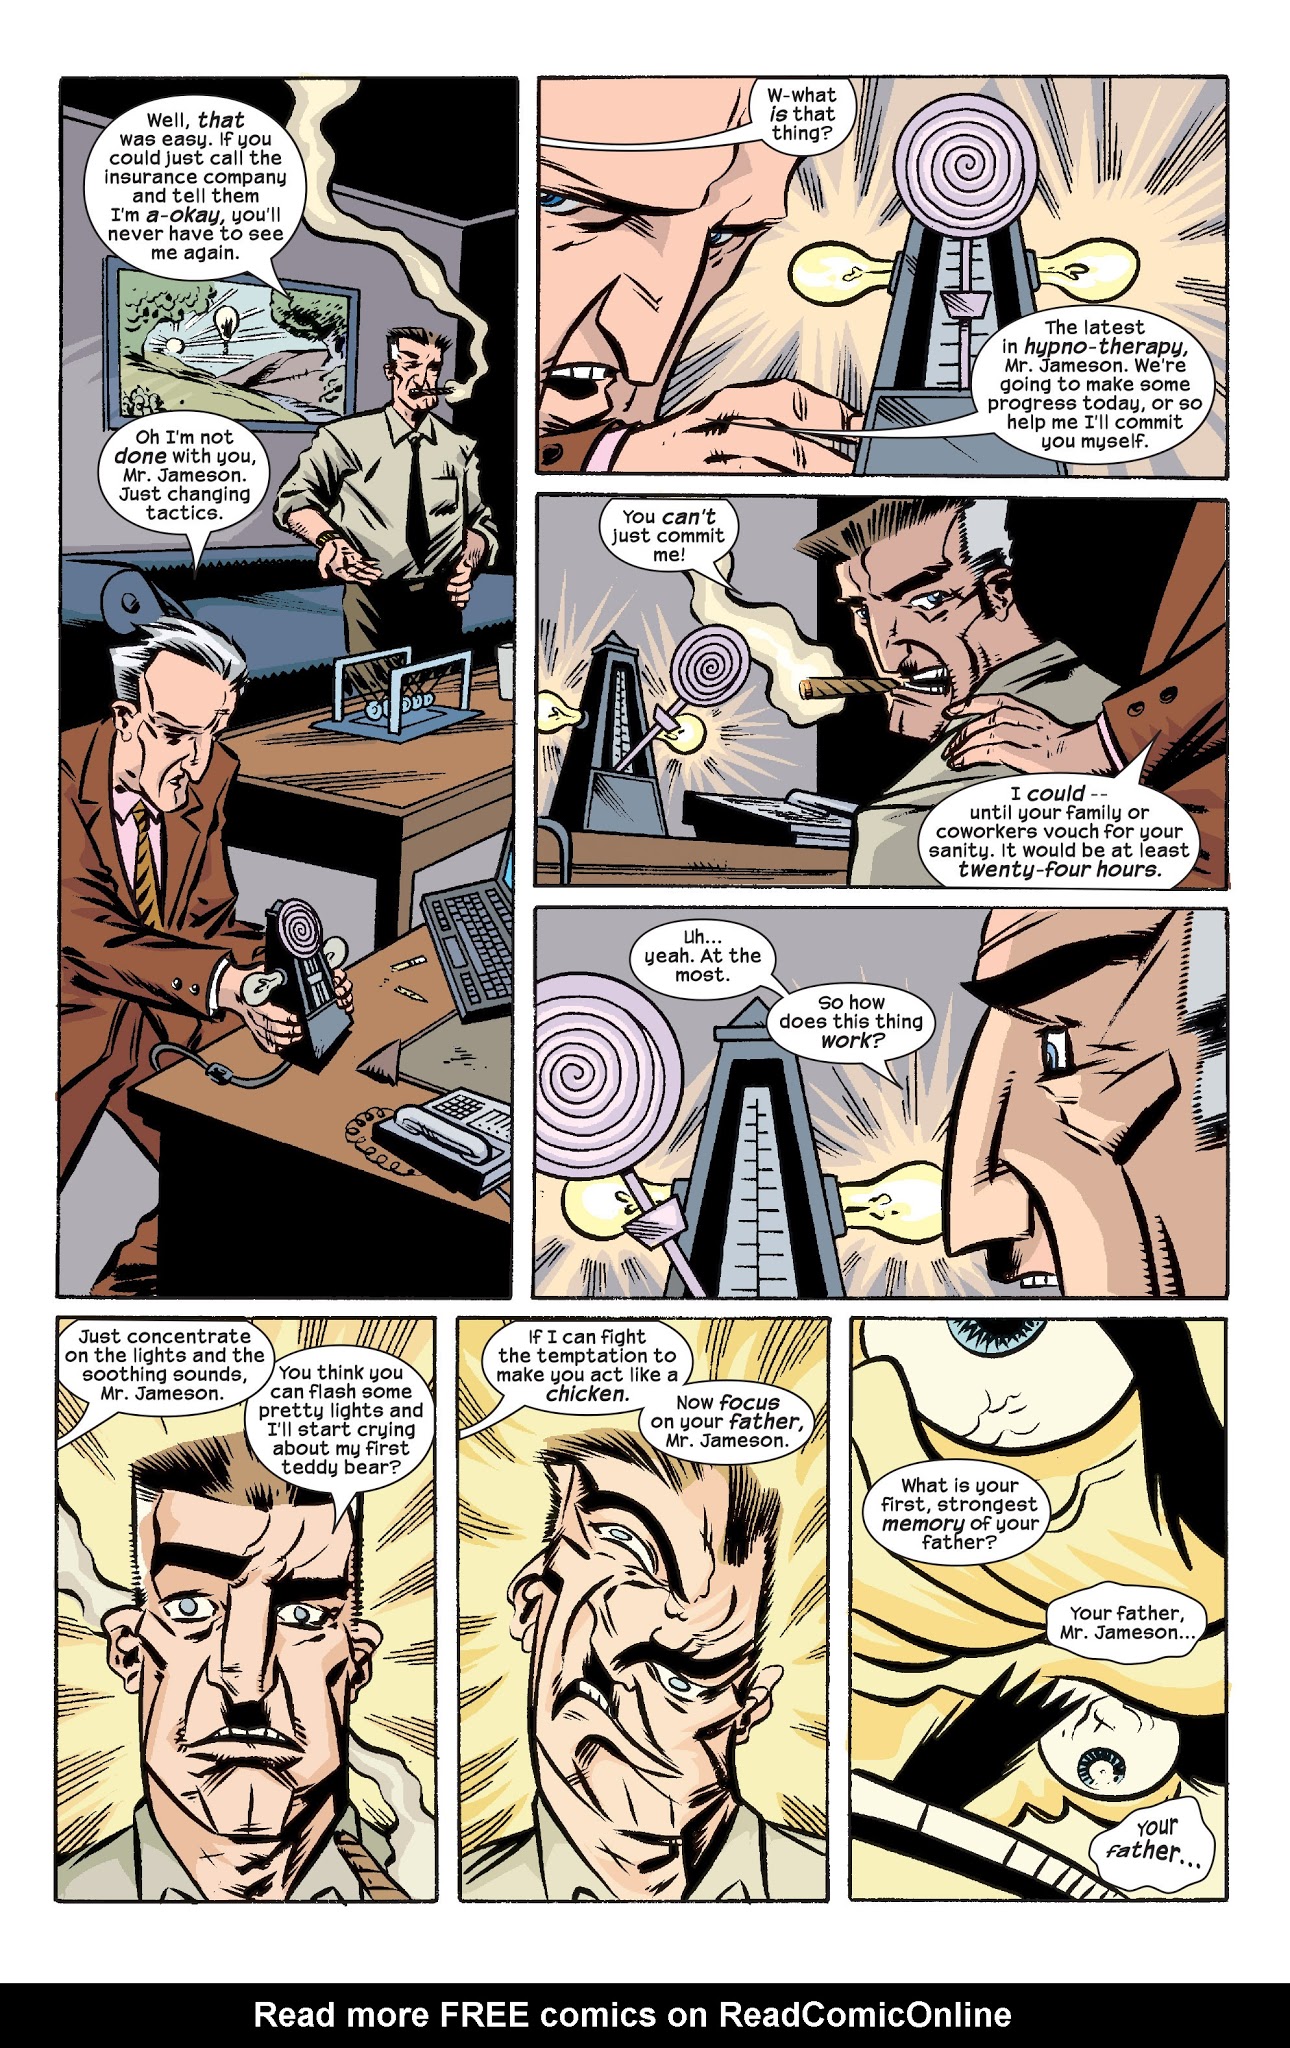 Read online Spider-Man: Daily Bugle comic -  Issue # TPB - 223